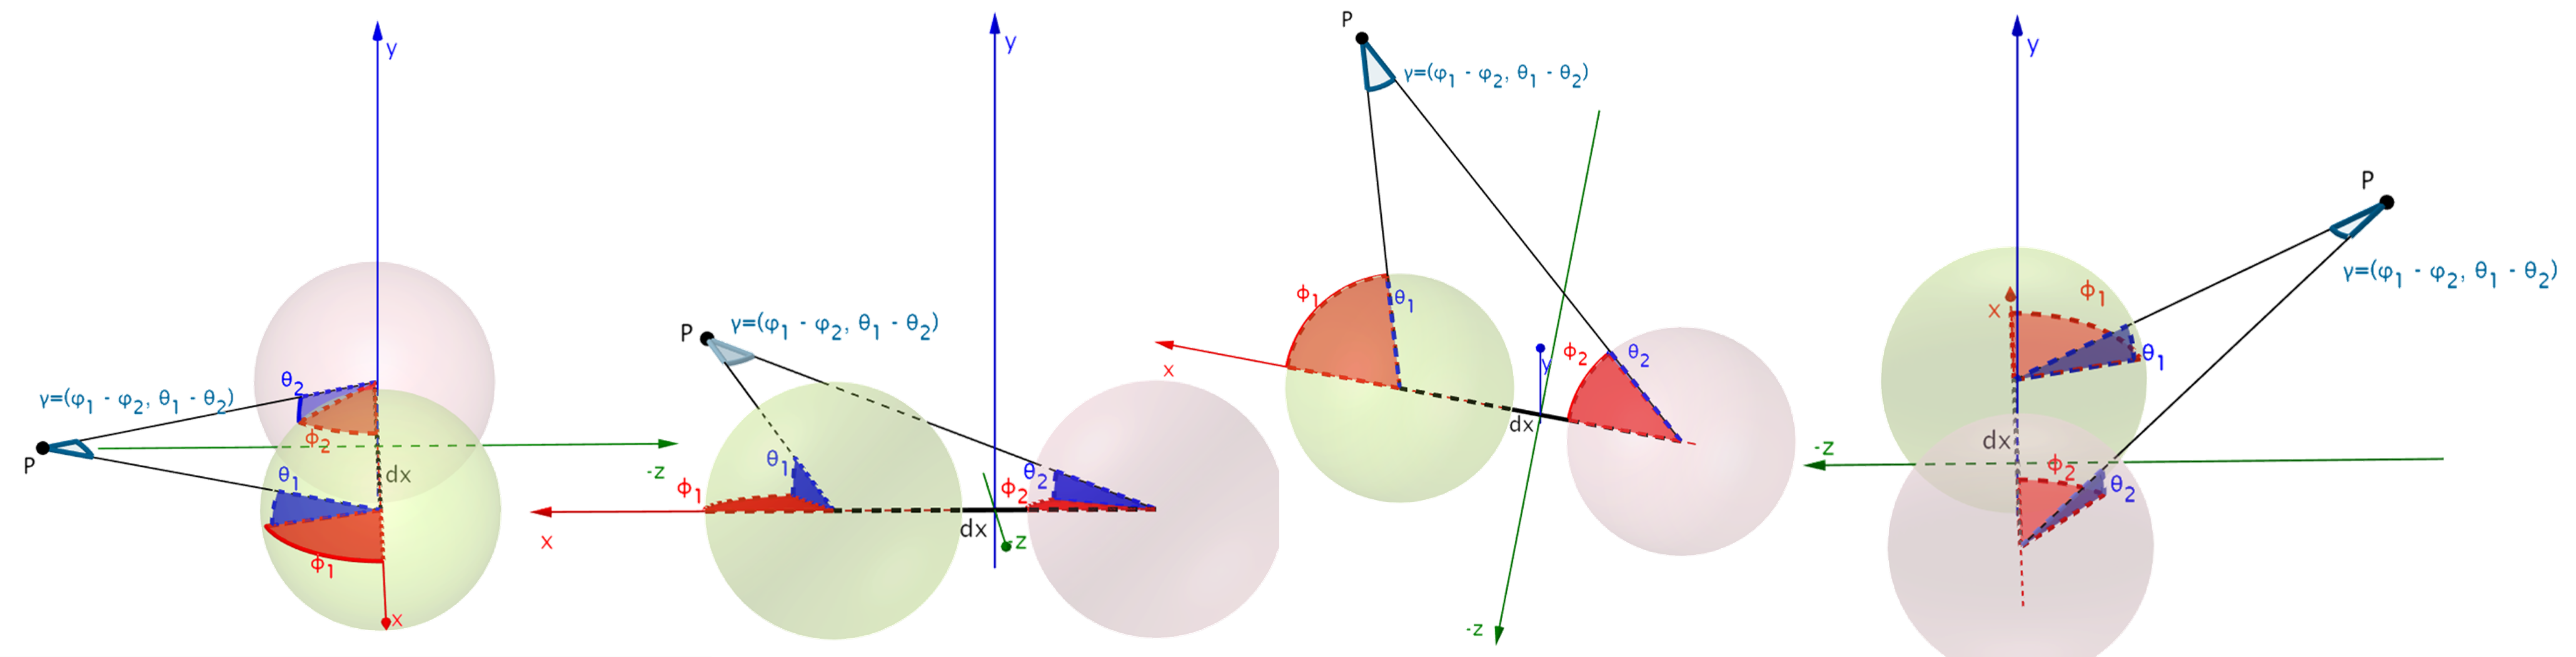 Spherical Angular Disparity for 2 Horizontally Displaced Viewpoints